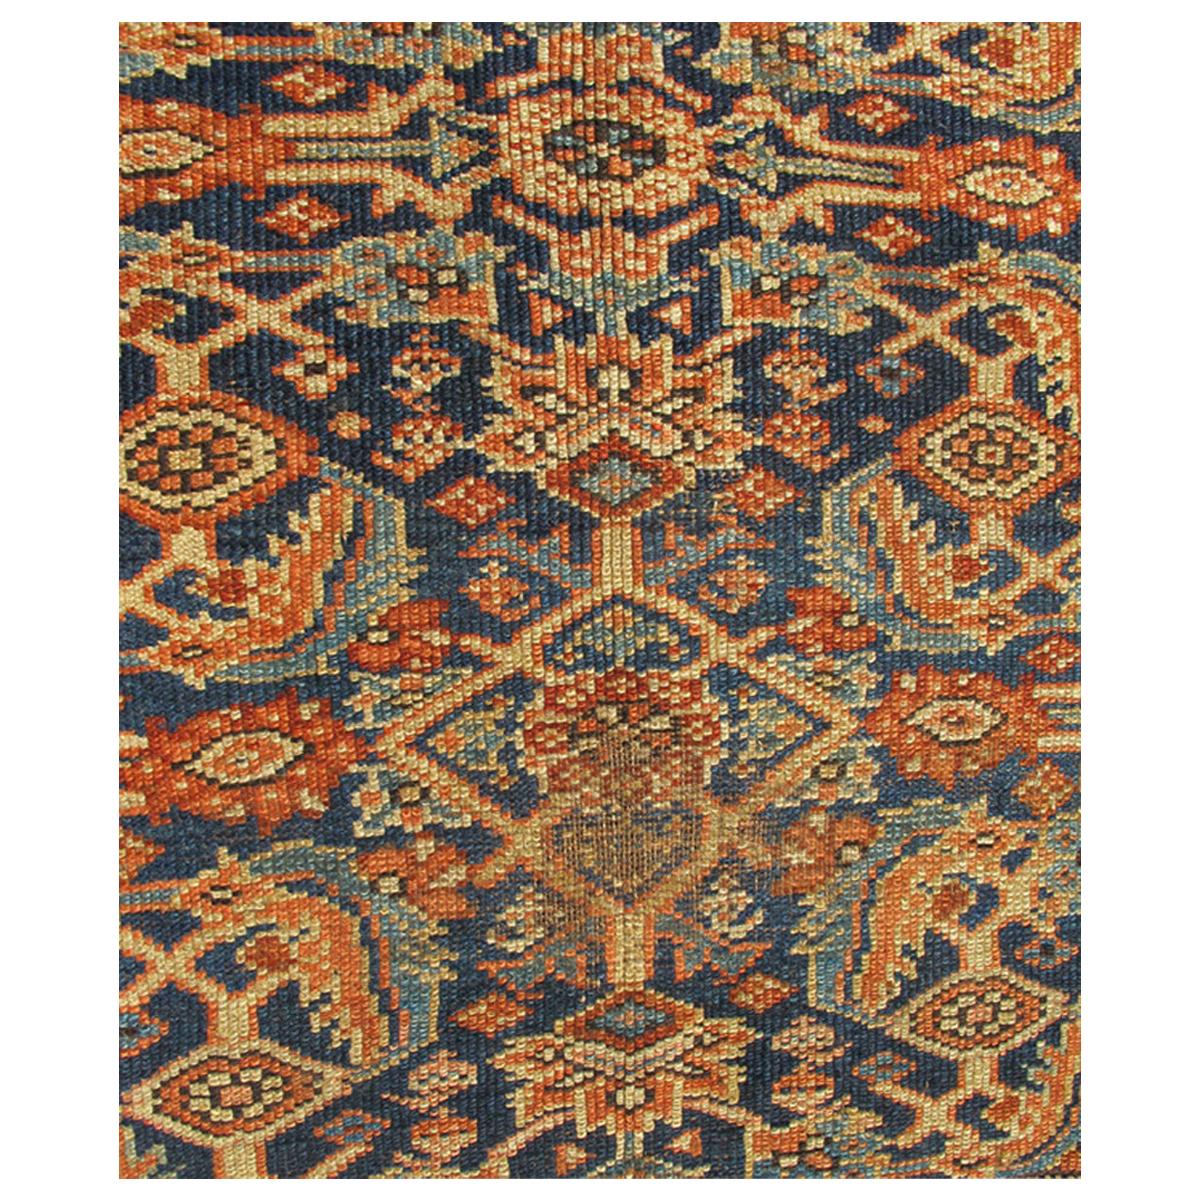 Antique Persian Sultanabad/Mahal Fragment Rug in Blue Background in Multi-Colors